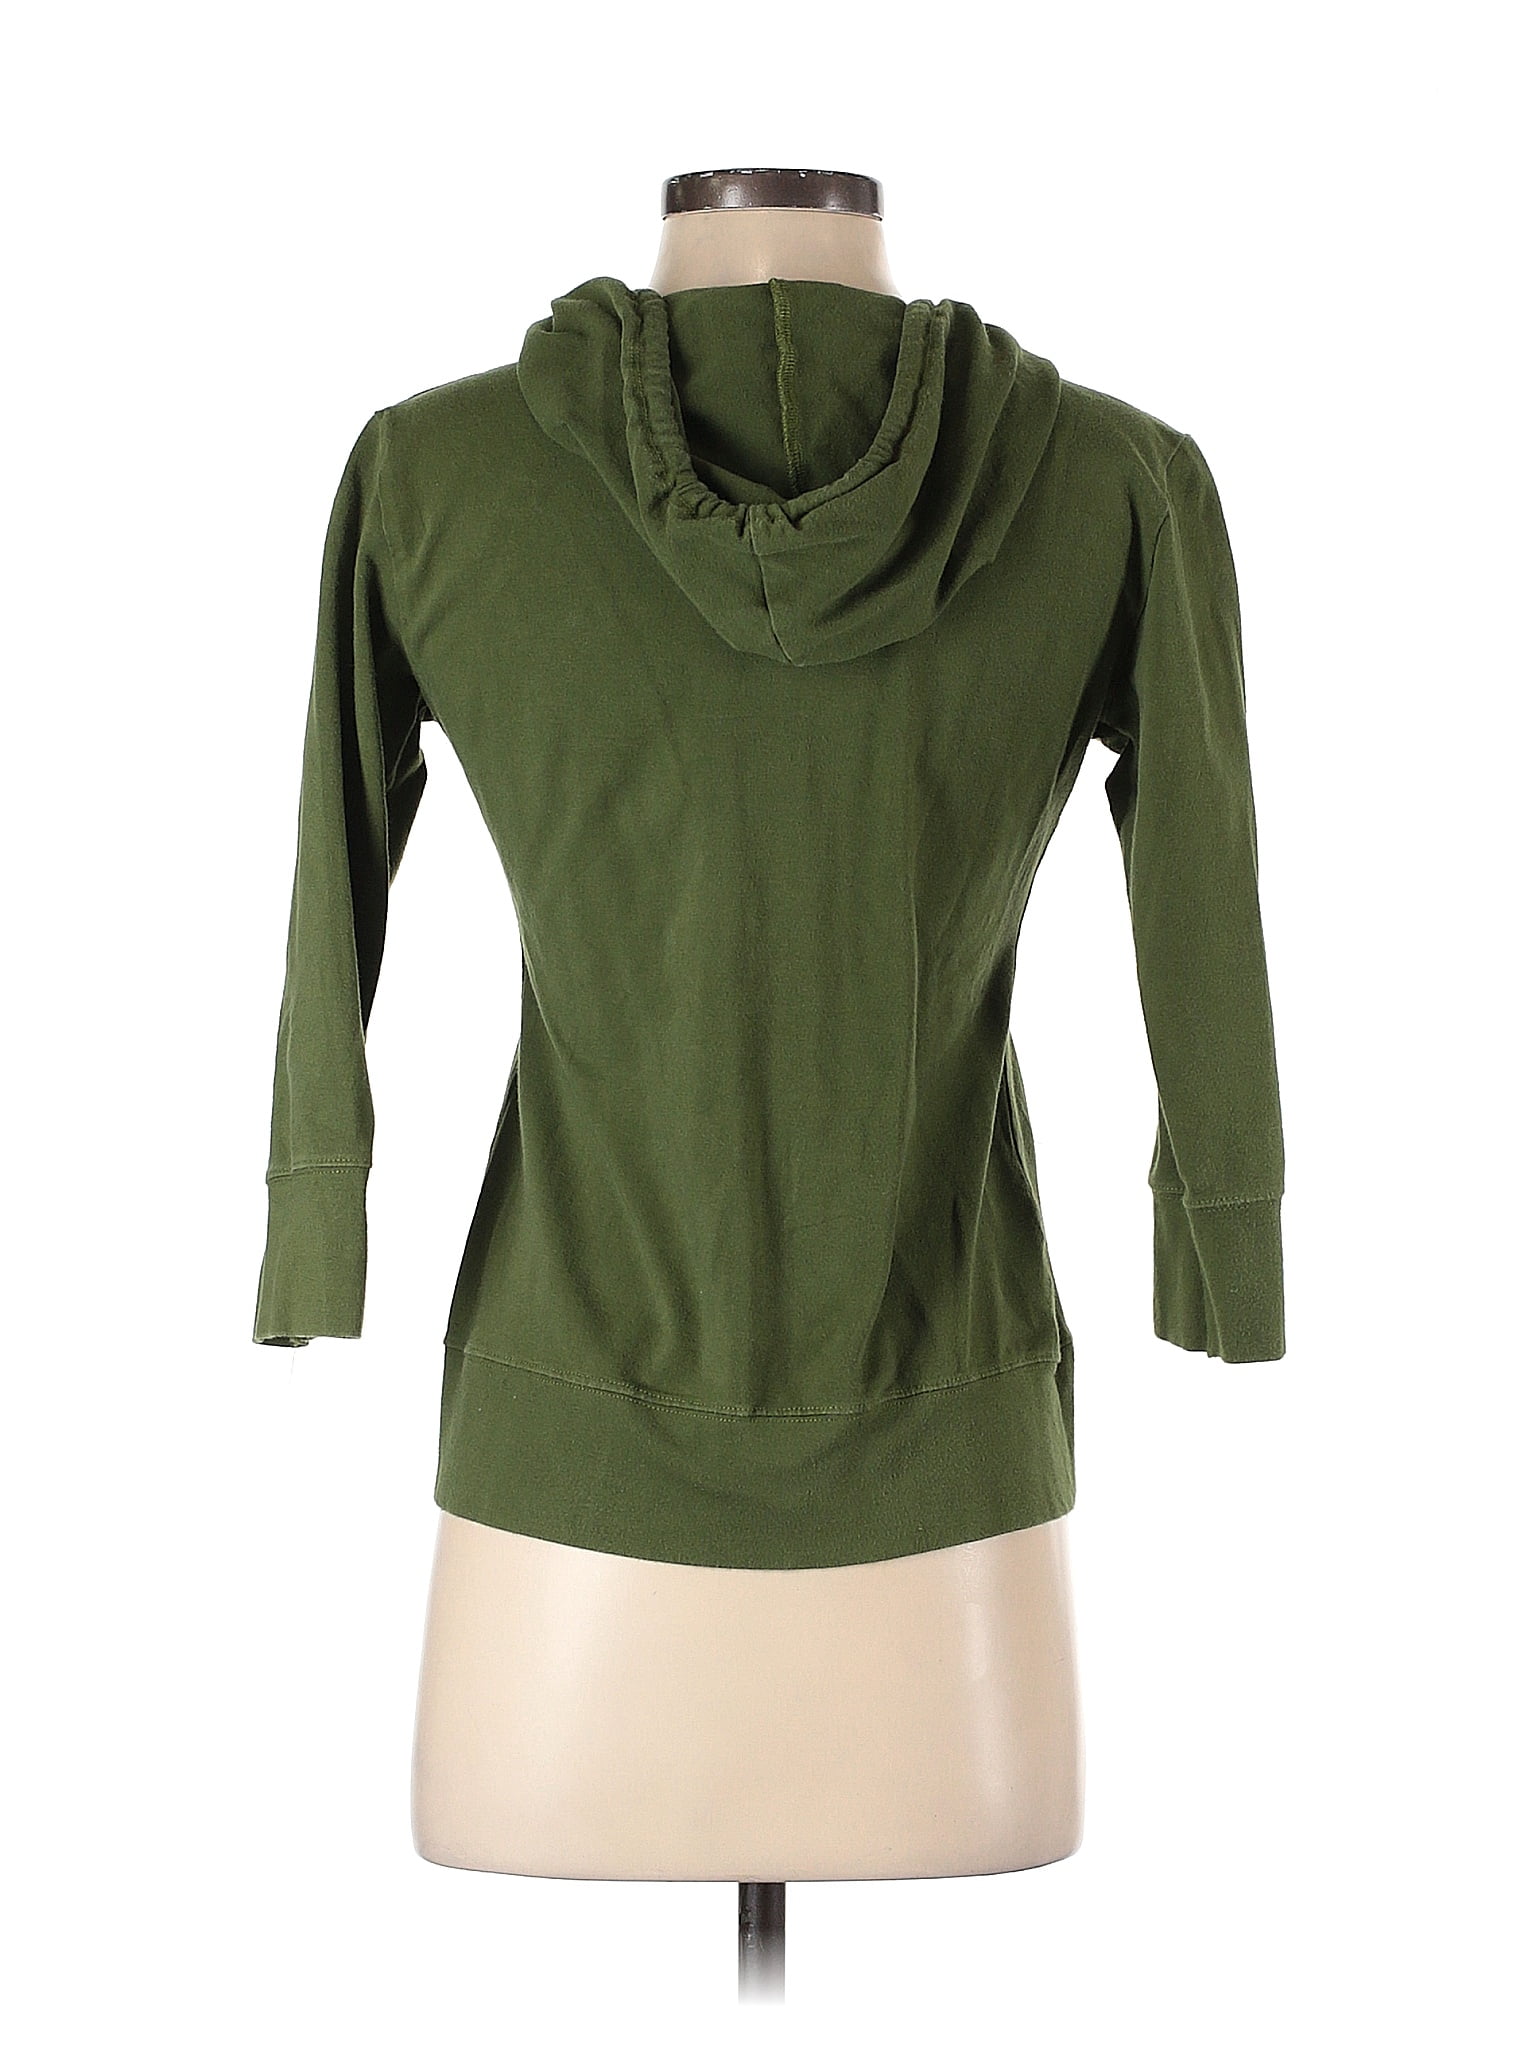 The Balance Collection by Marika Women's Clothing On Sale Up To 90% Off  Retail